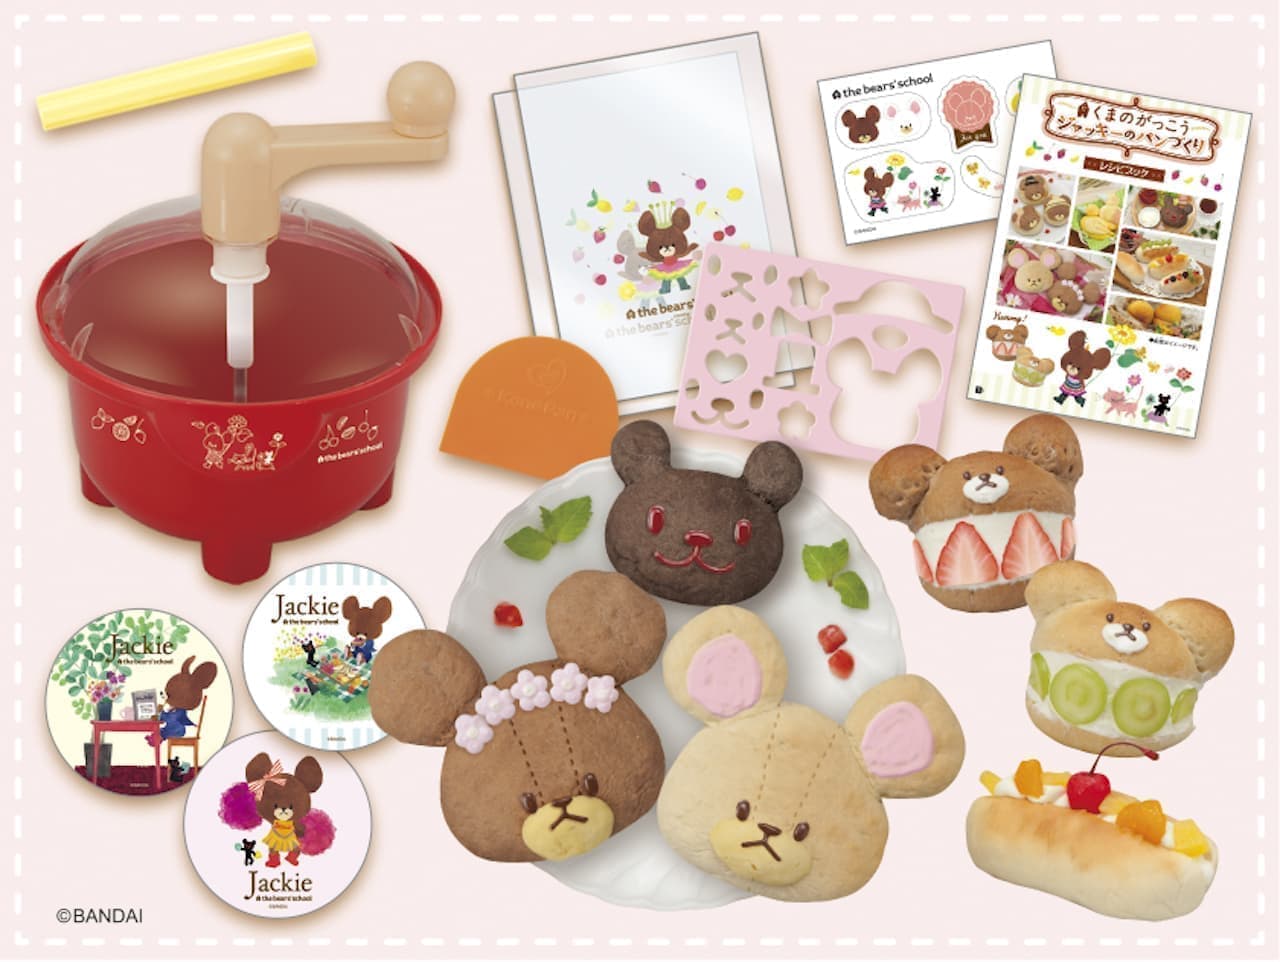 Megahouse "The Bears' School Jackie's Bread Making"